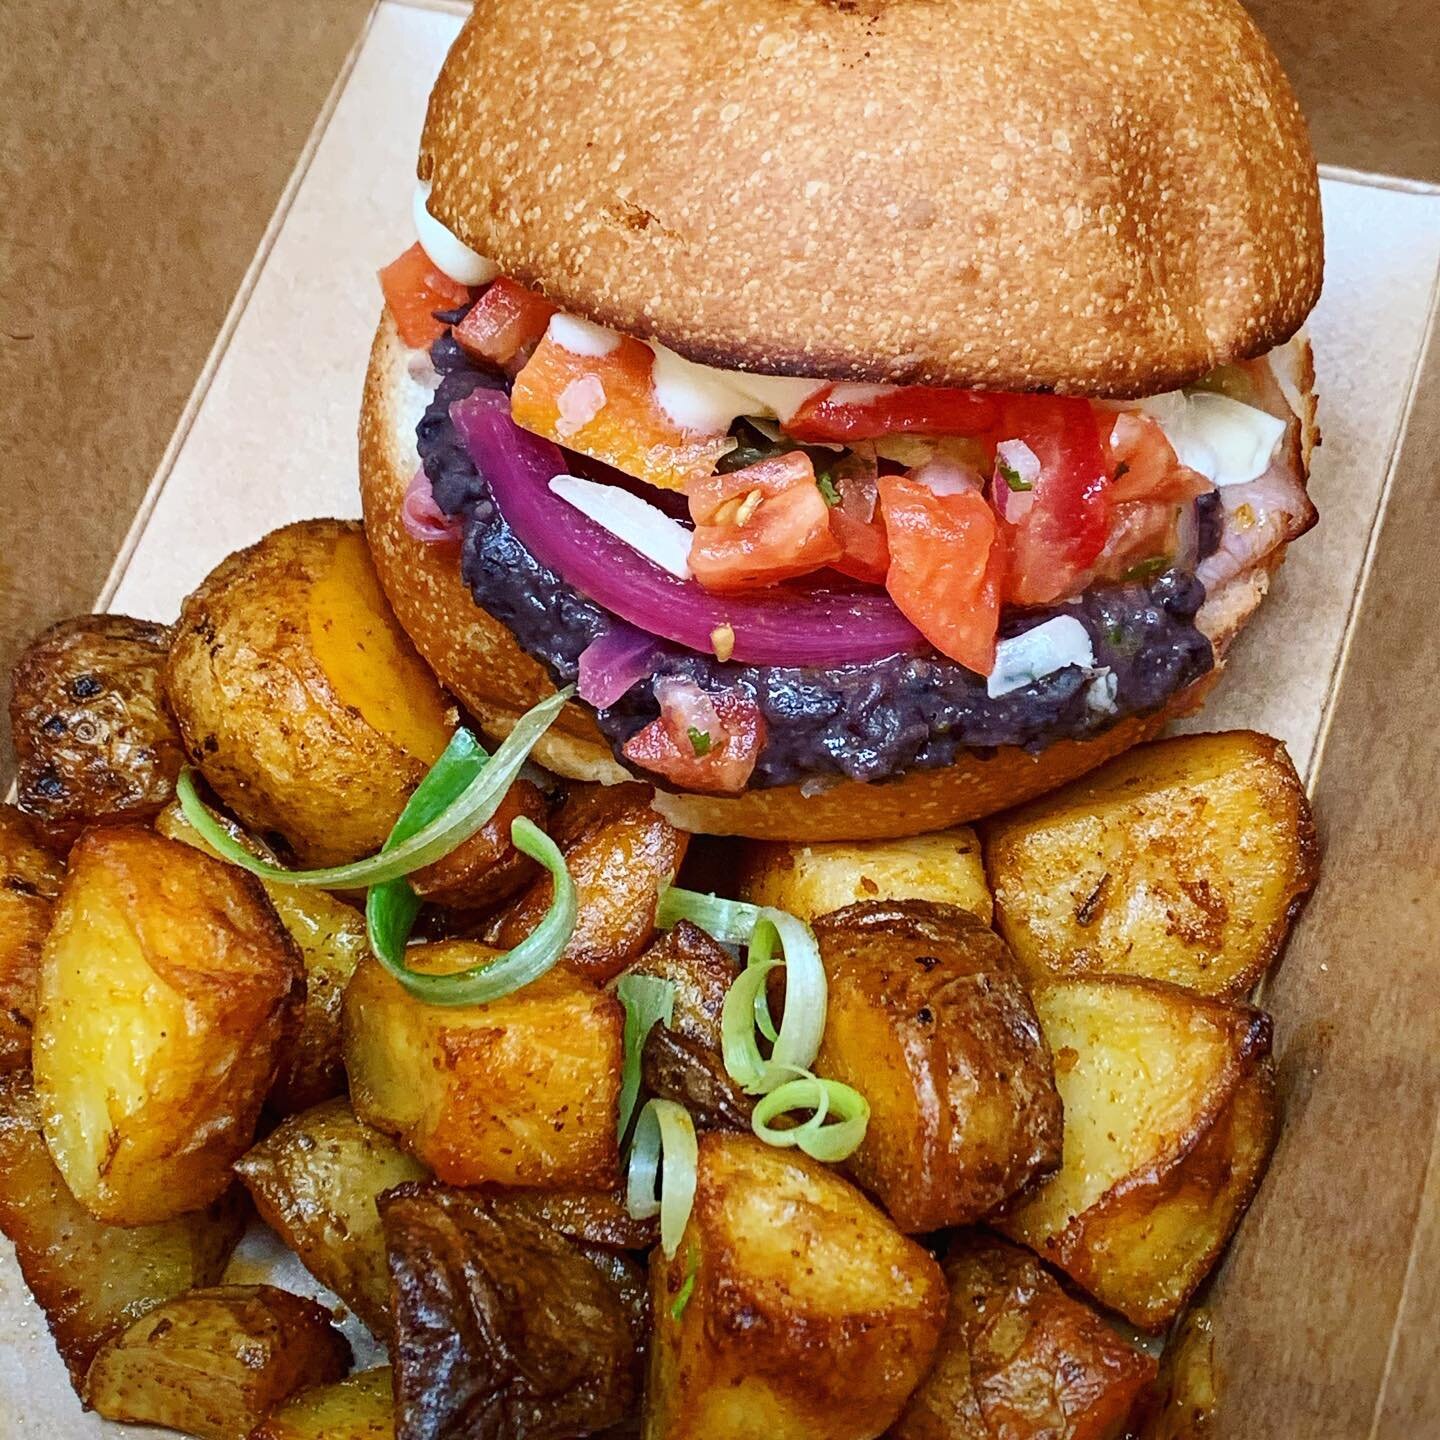 We love💞working with @100kmfoods to source fresh ingredients from local farmers whenever we can. The Gordita is loaded with Ontario ham, cheddar, tomatoes &amp; comes with a side of locally grown potatoes 
#FarmFresh 
Order it now for delivery throu